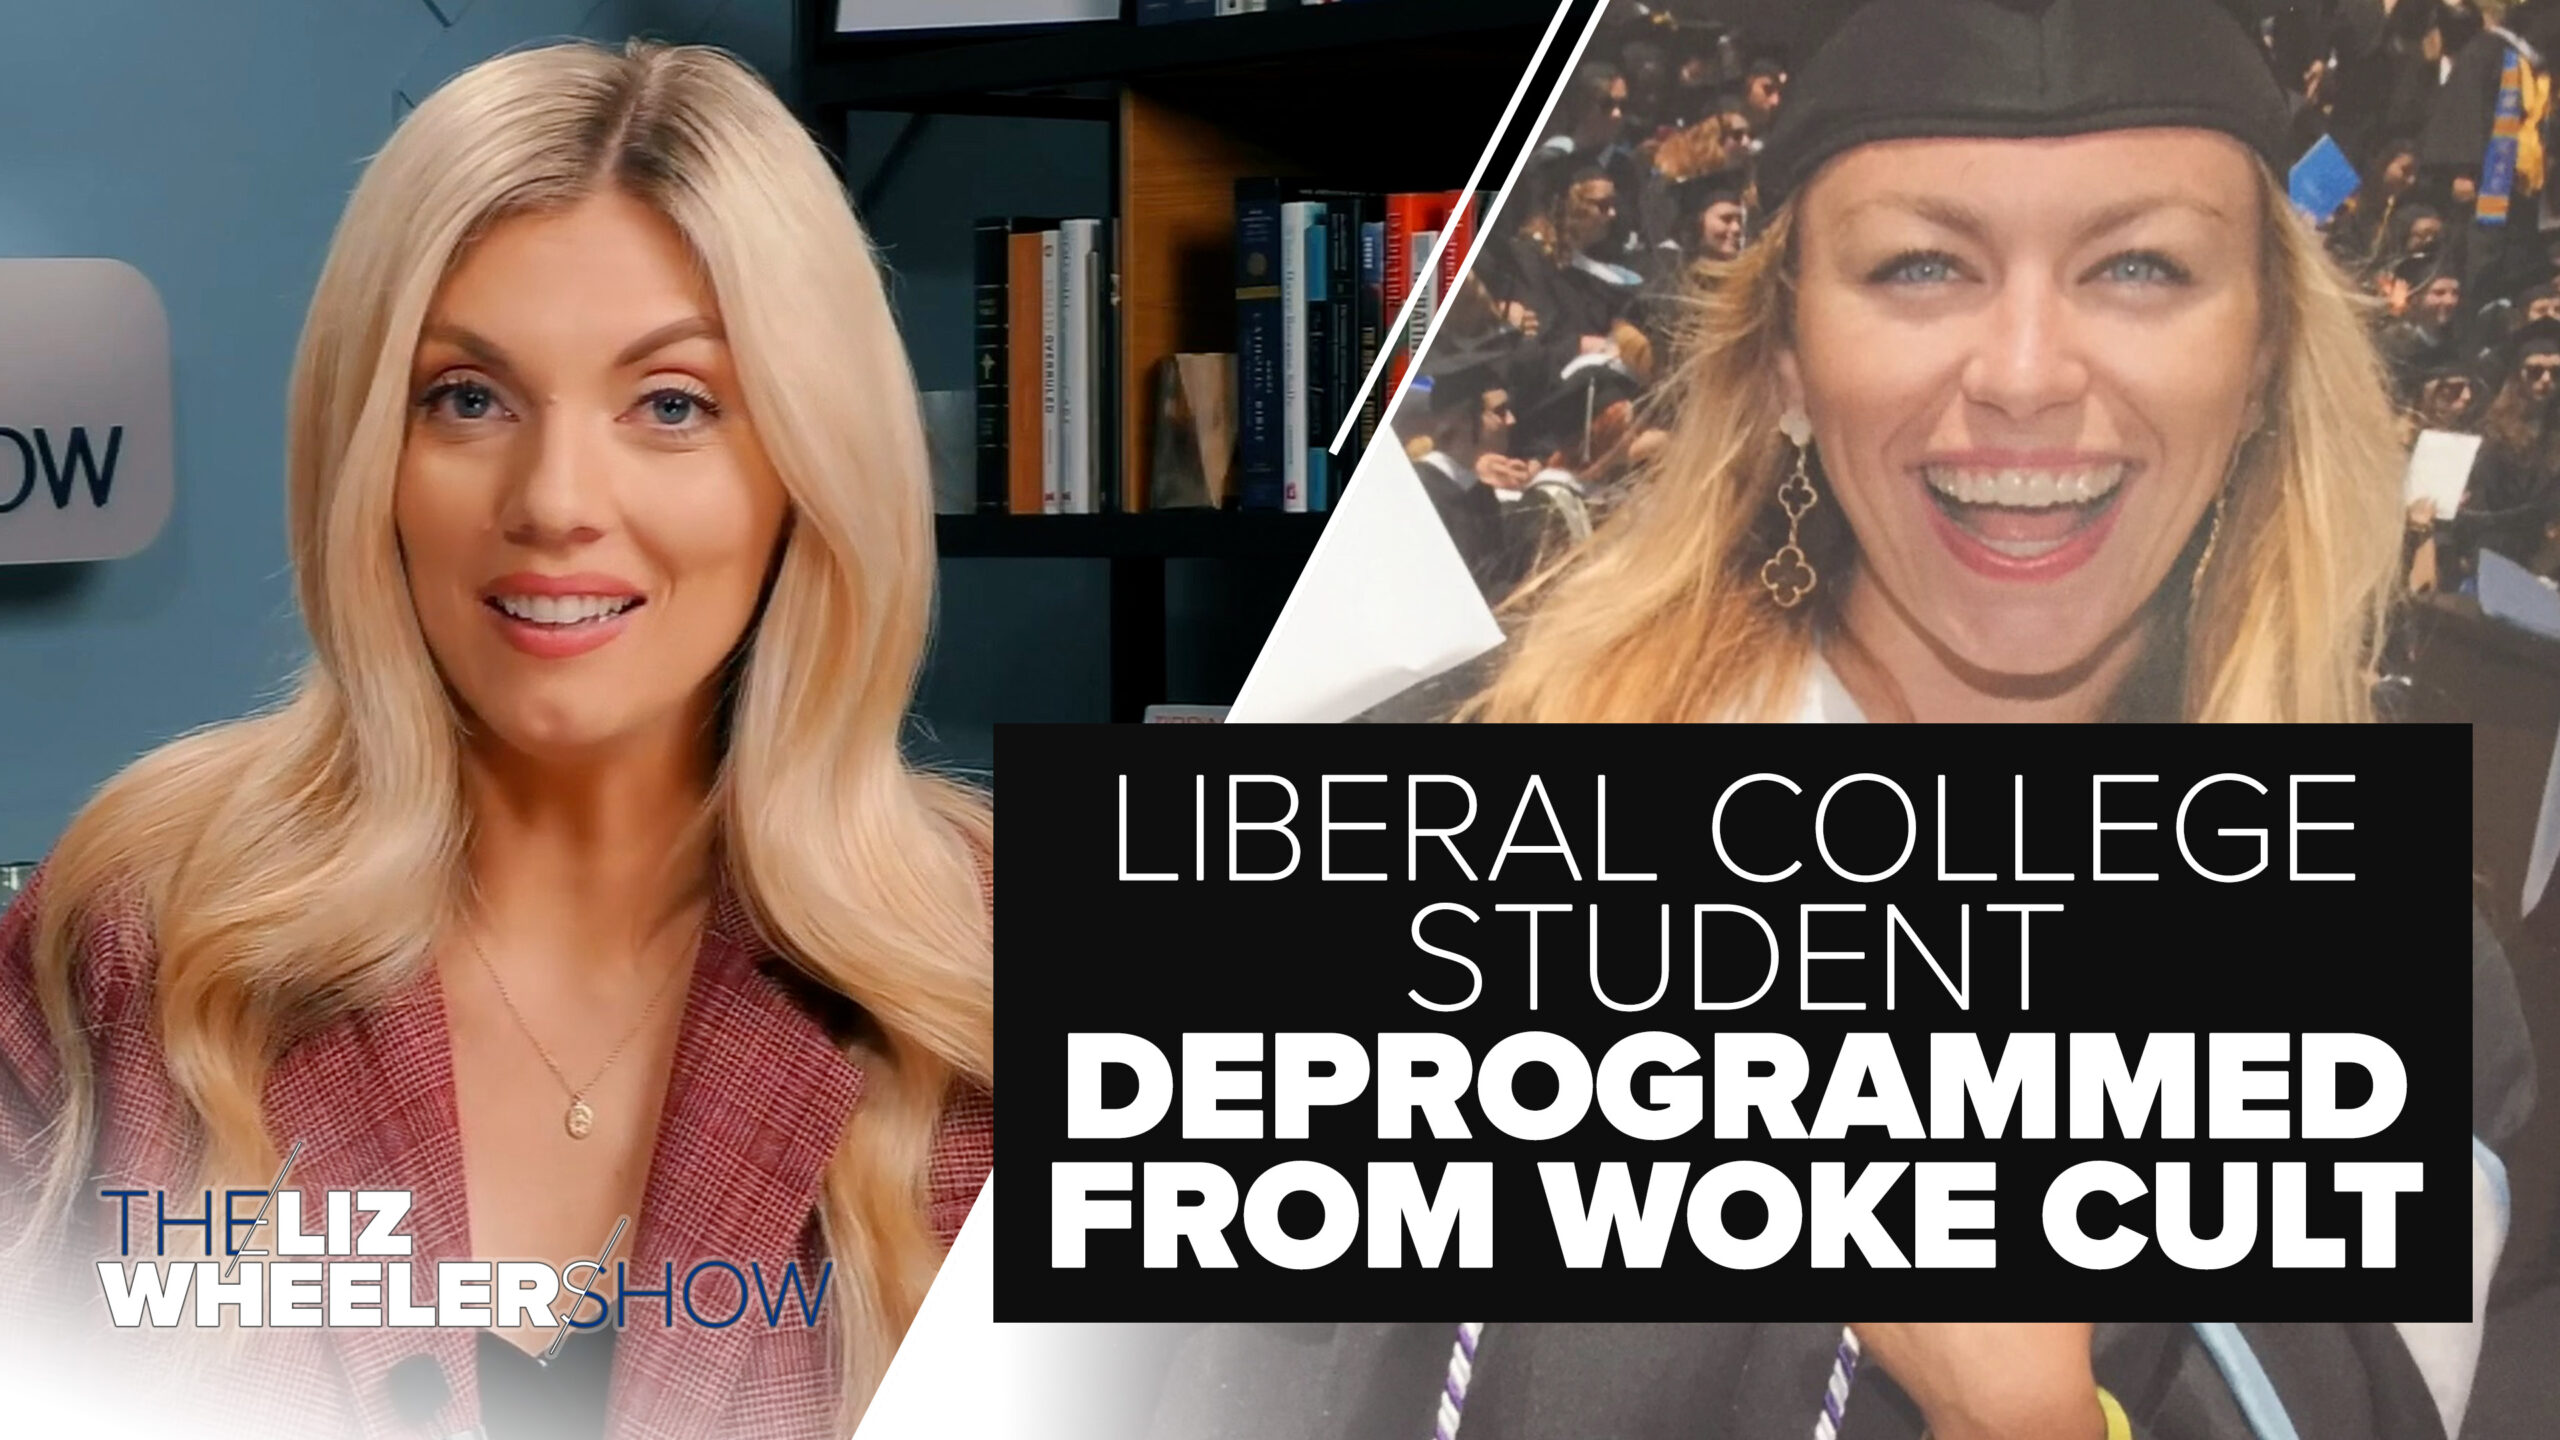 Liberal College Student Turns Conservative After Her Mom Uses a Cult Deprogrammer